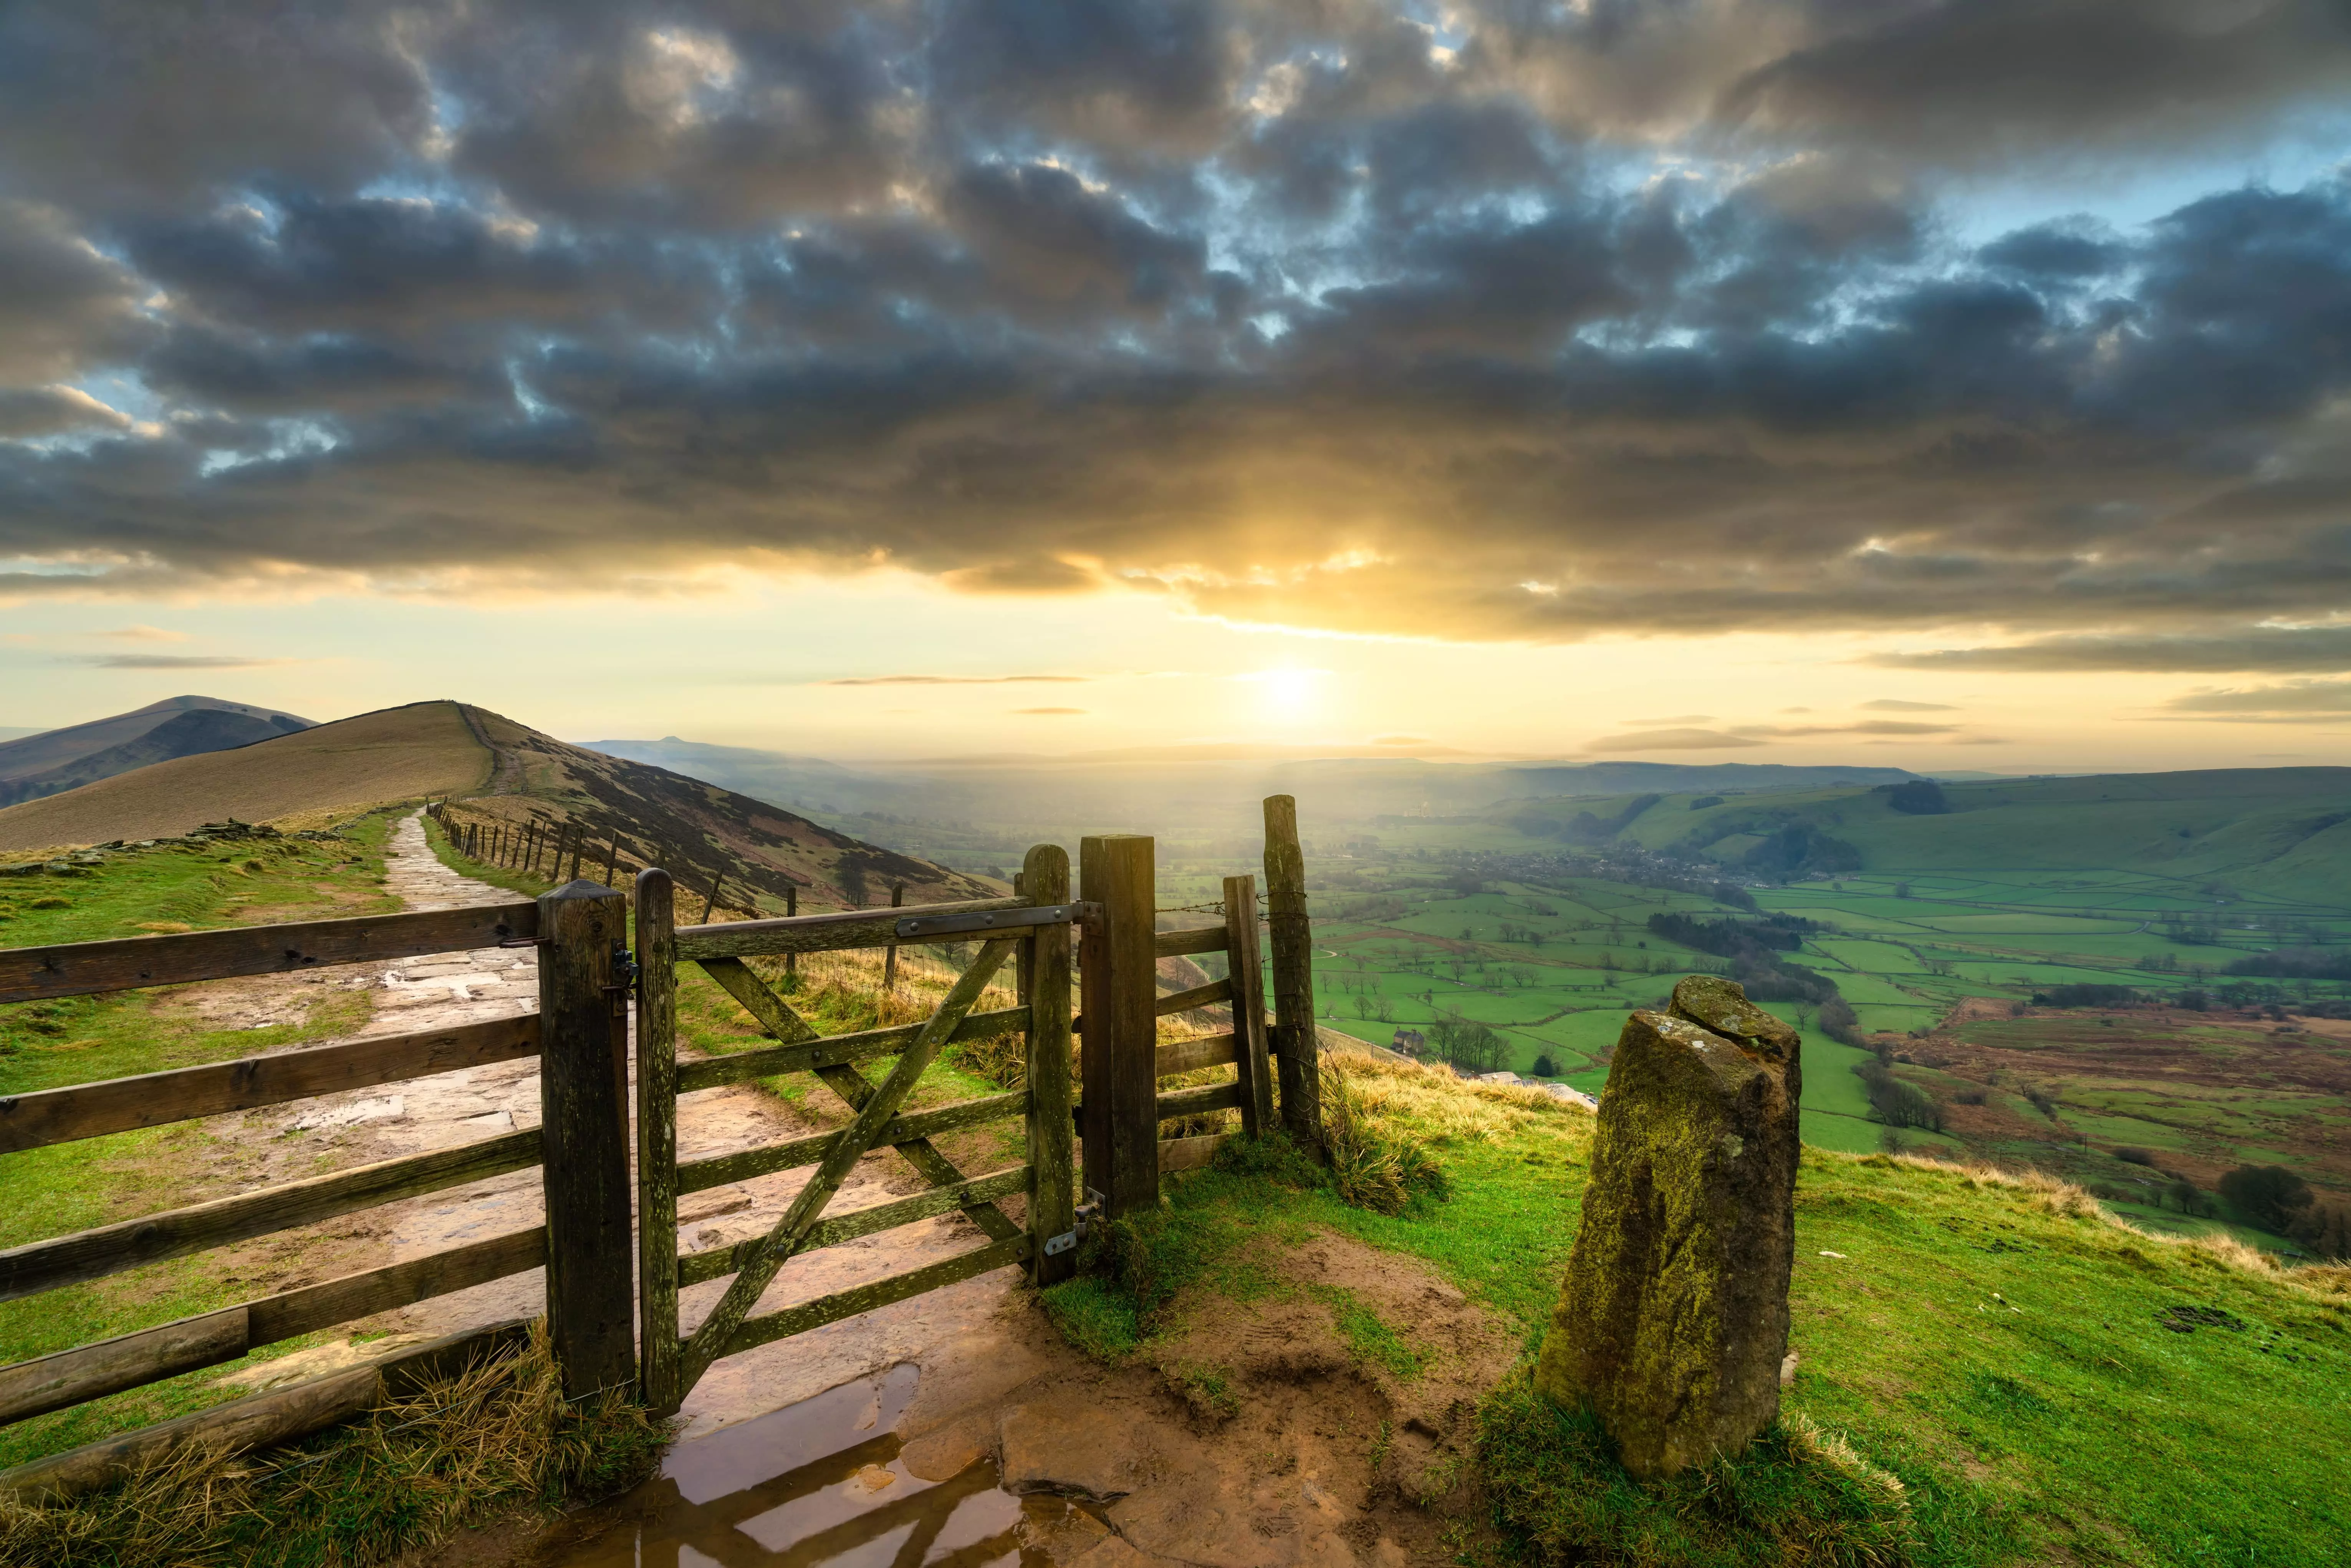 The Great Ridge at sunrise on Mam Tor hill in Peak District